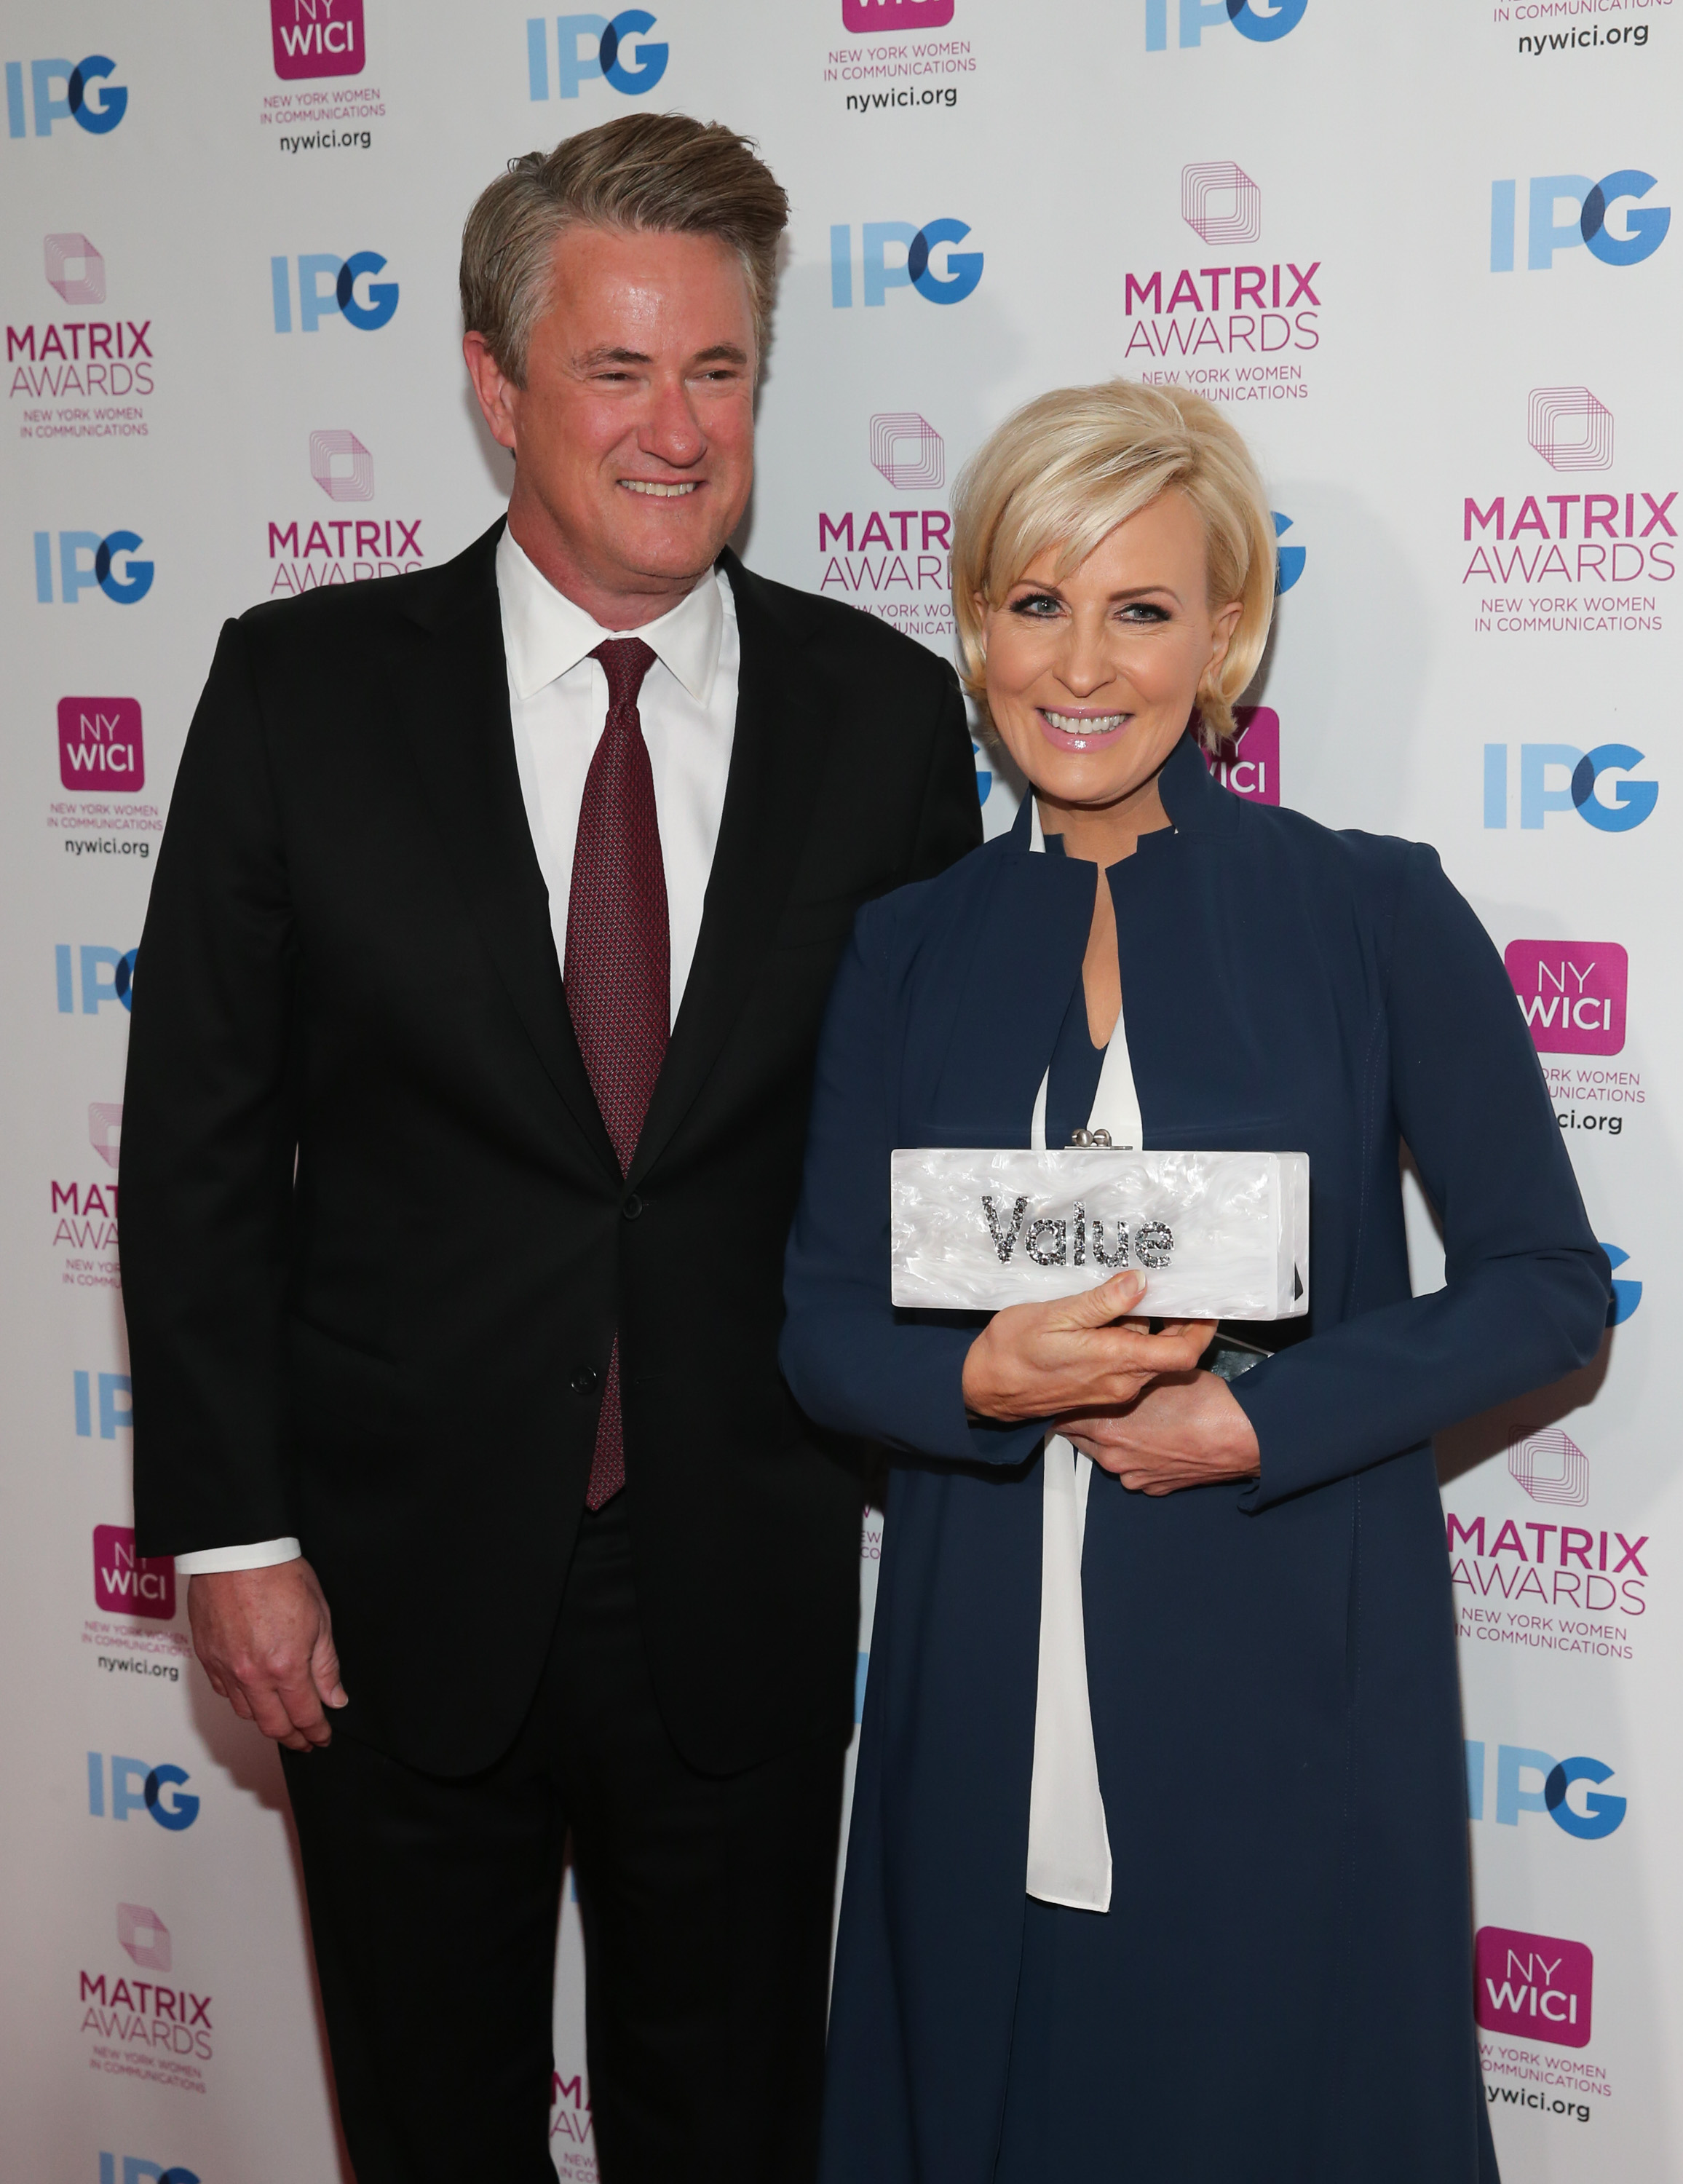 Mika Brzezinksi and Joe Scarborough attend the 2018 Matrix Awards at Sheraton Times Square on April 23, 2018 in New York City. (Photo by Rob Kim/Getty Images)